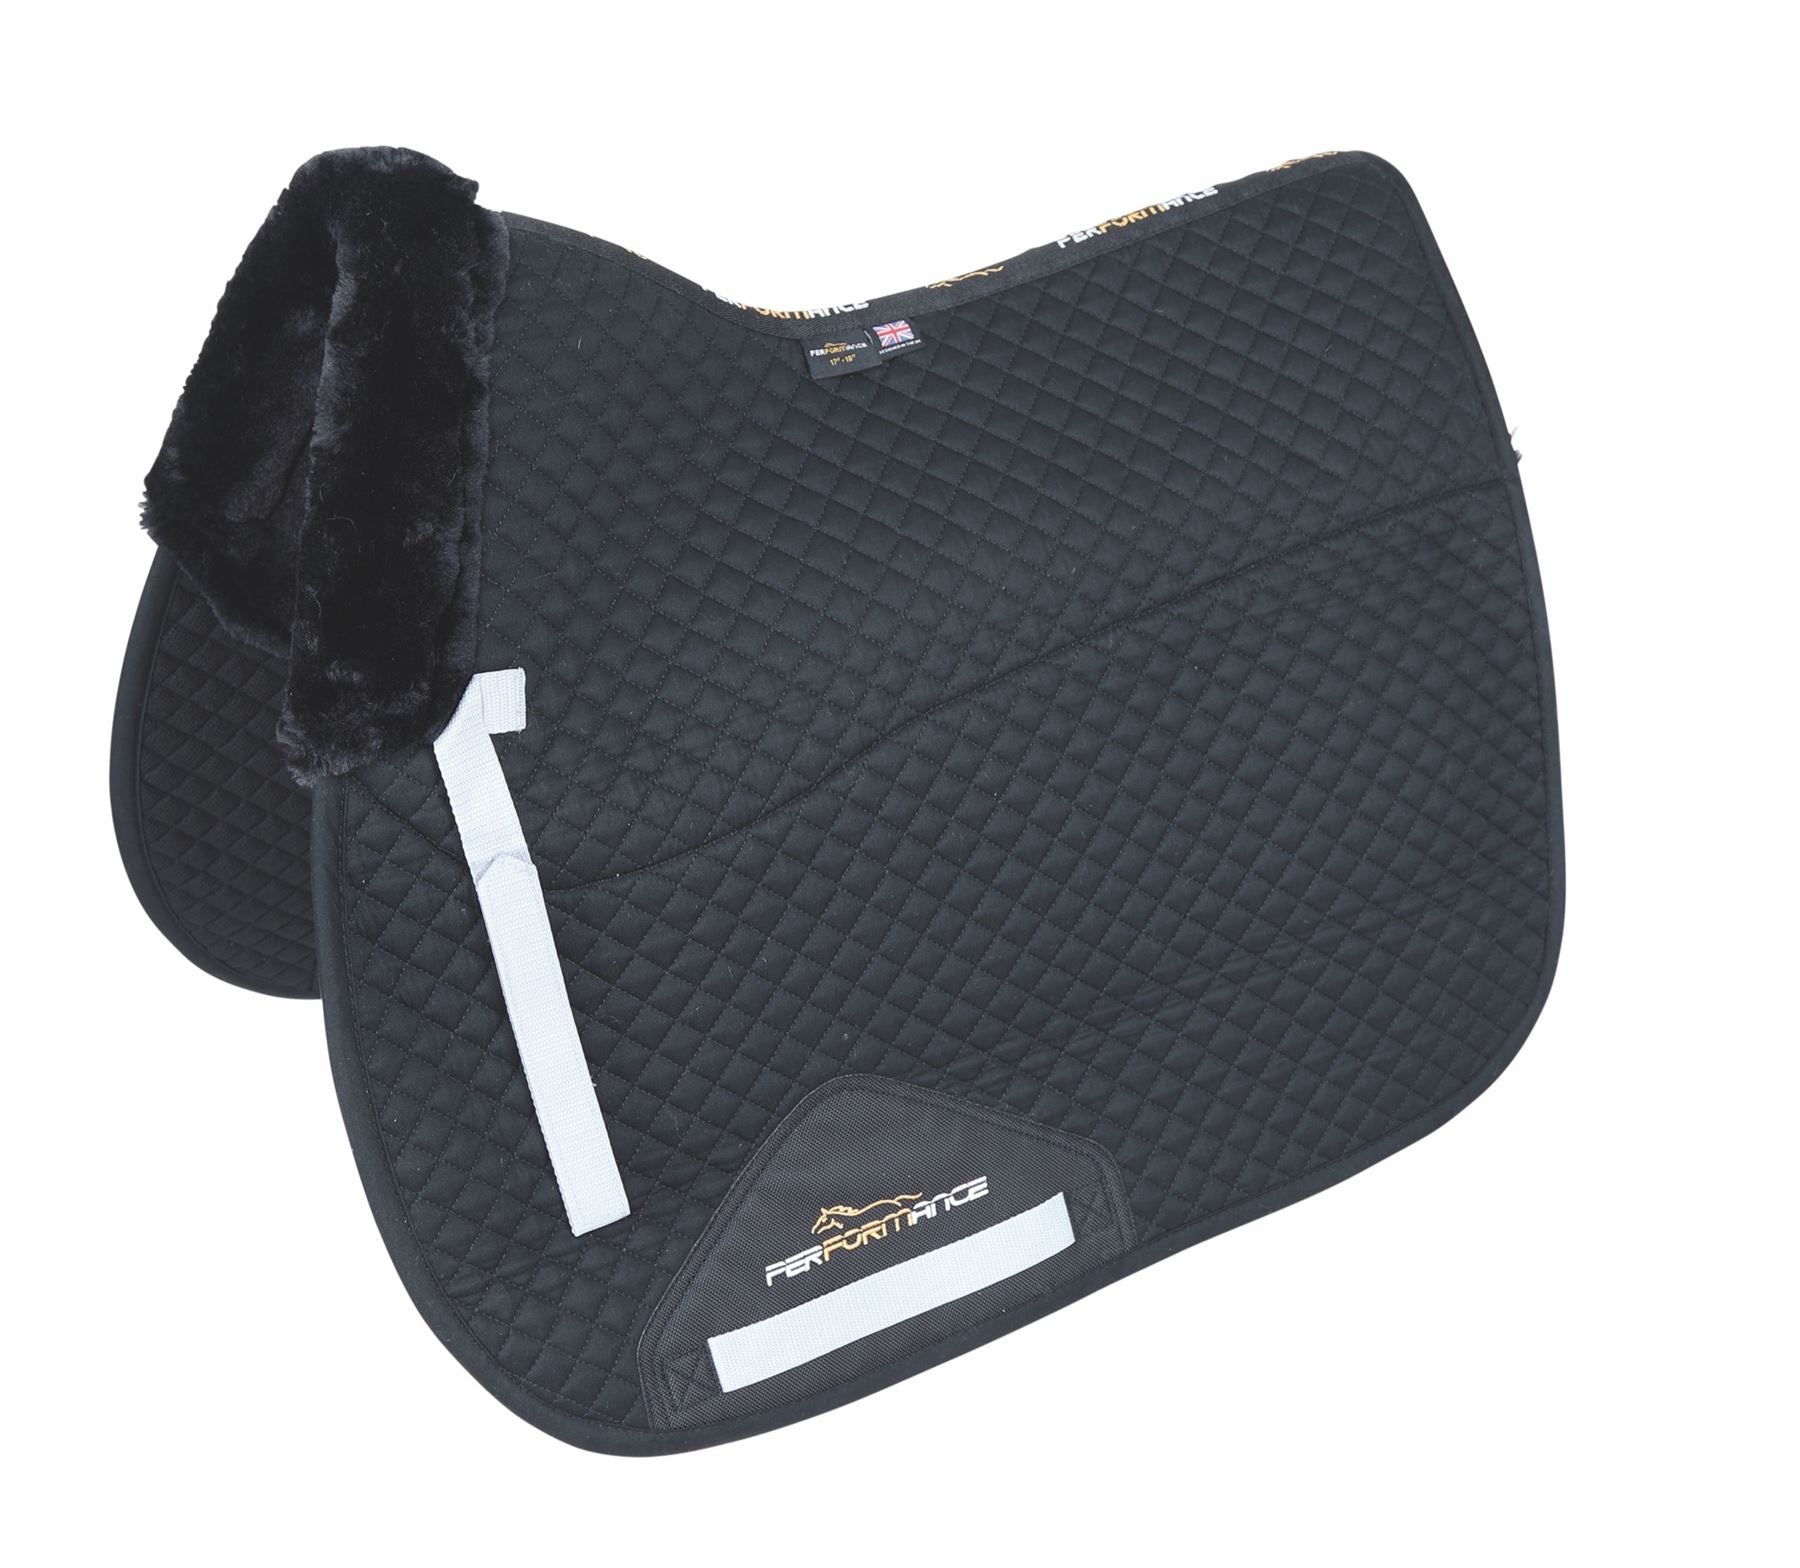 Shires Performance Supafleece Saddlecloth - Just Horse Riders